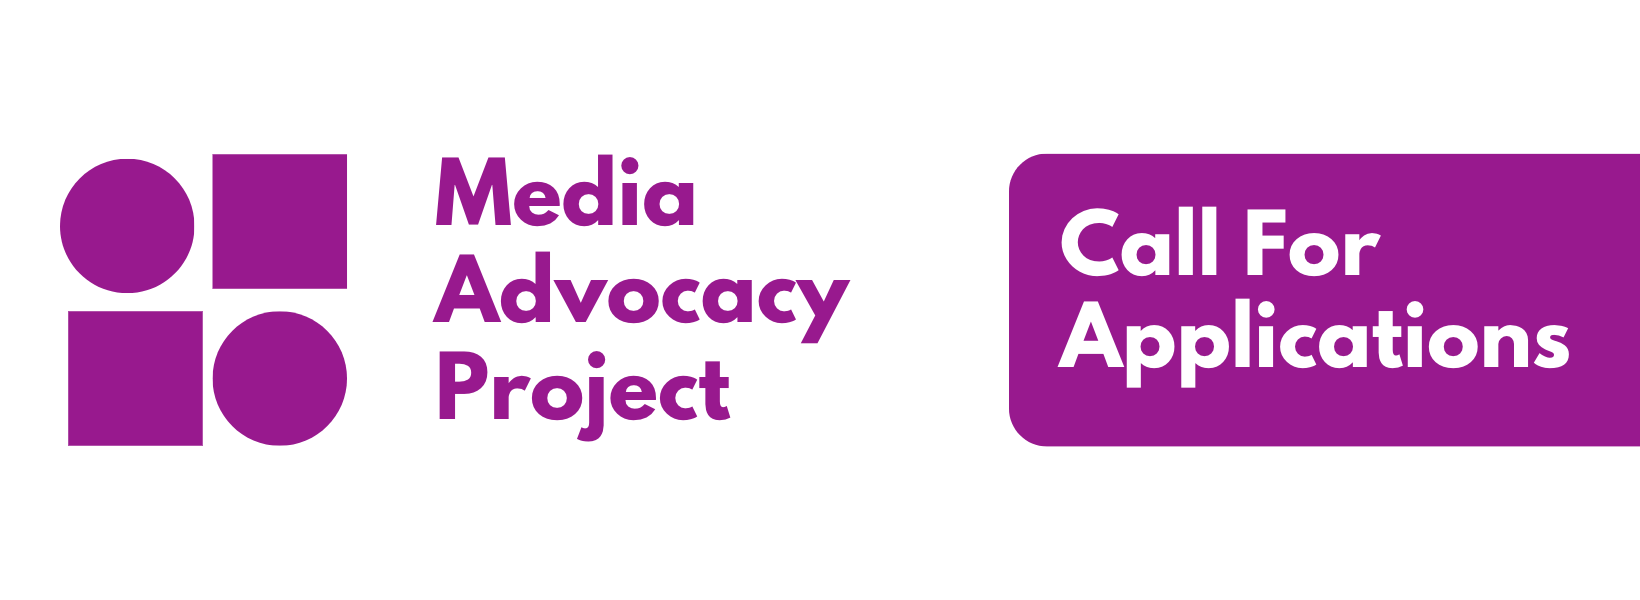 Media Advocacy Project (MAP)